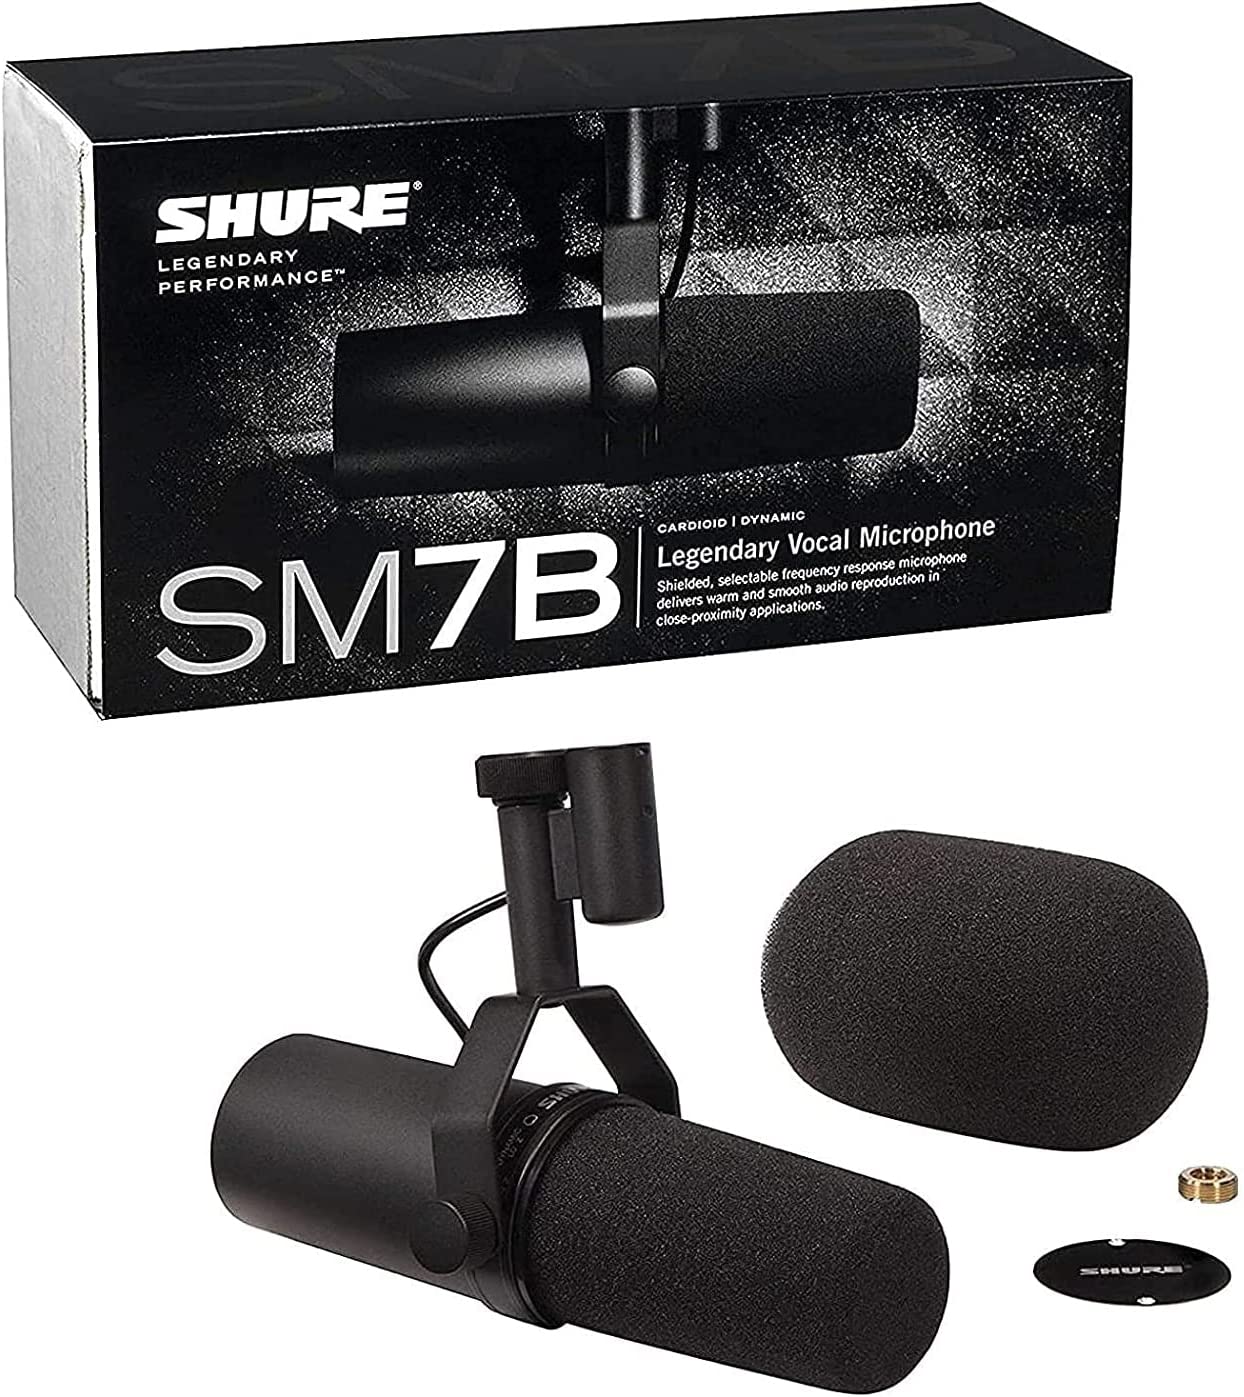 Shure SM7B Vocal Dynamic Microphone for Broadcast, Podcast & Recording, XLR Studio Mic for Music & Speech, Wide-Range Frequency, Warm & Smooth Sound, Rugged Construction, Detachable Windscreen - Black - image 3 of 6